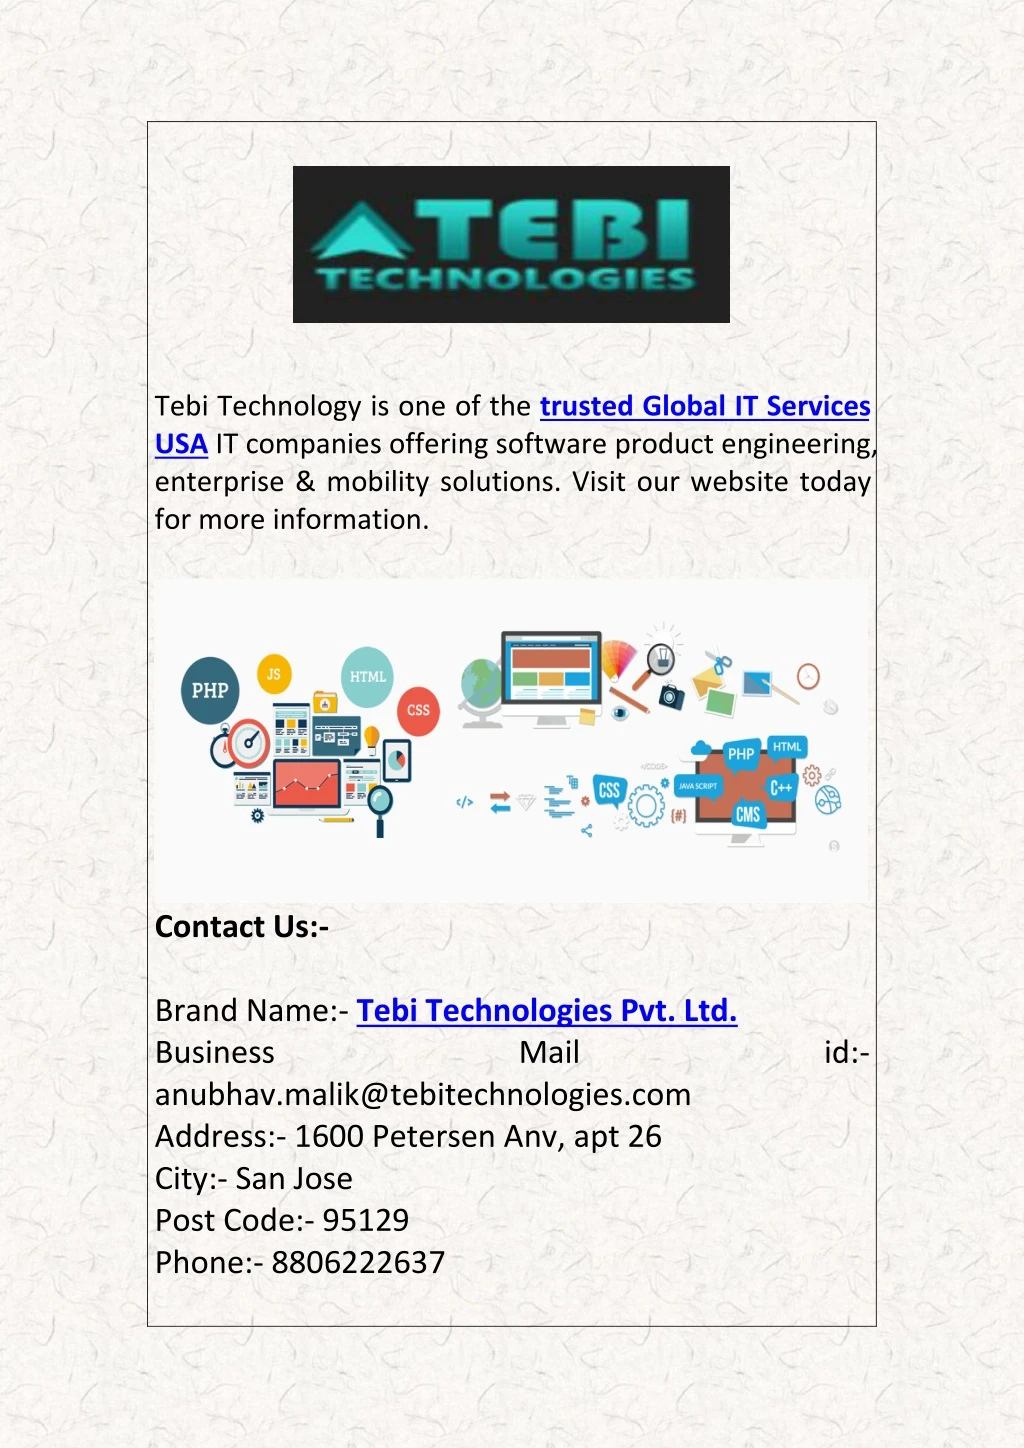 tebi technology is one of the trusted global